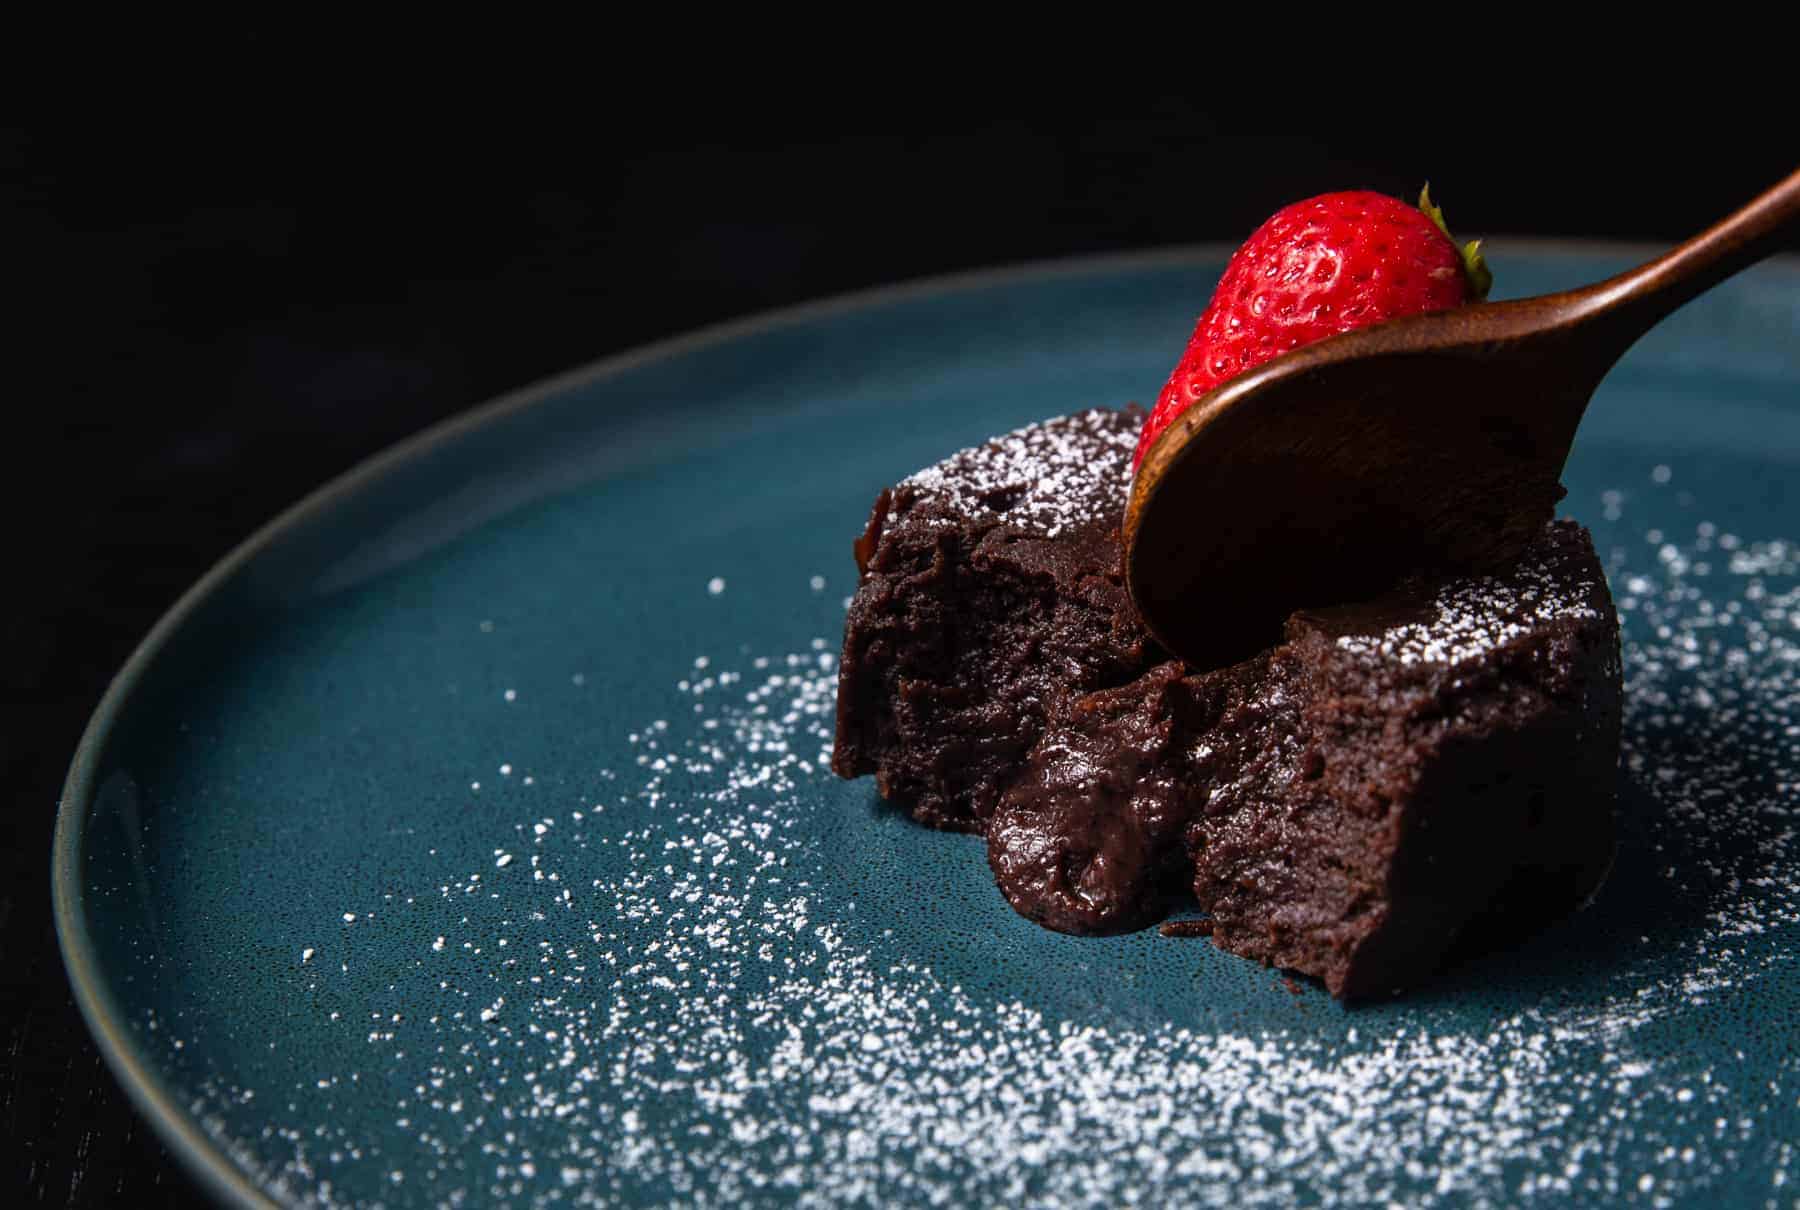 🎂 Don’t Be Shocked When We Guess Your Age and Birth Month from the Desserts You Like chocolate lava cake